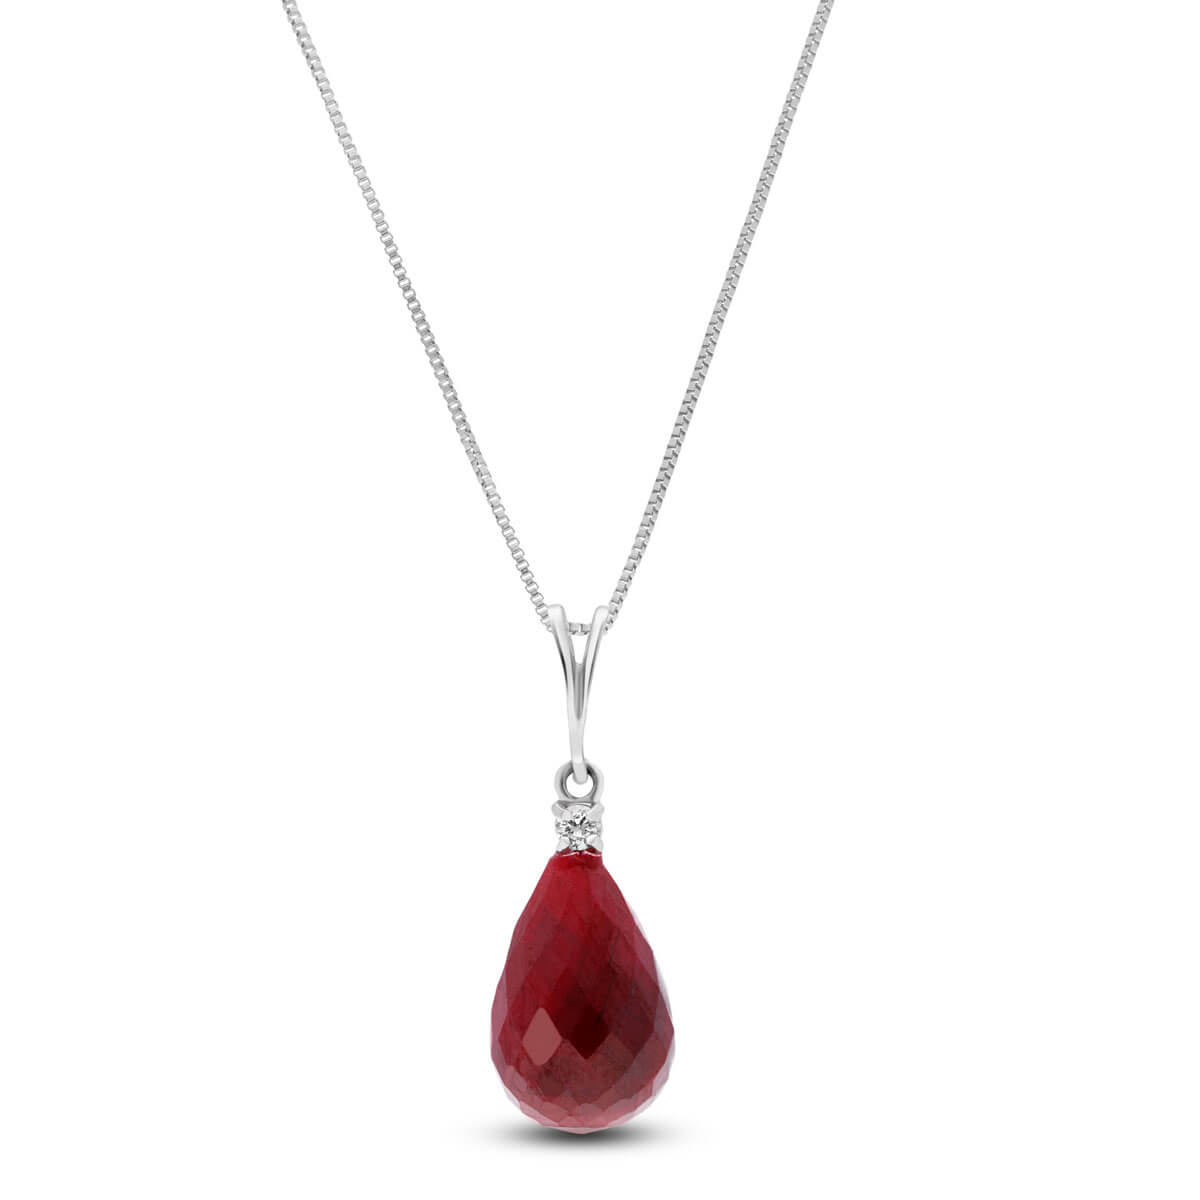 Ruby & Diamond Beret Pendant Necklace in 9ct White Gold